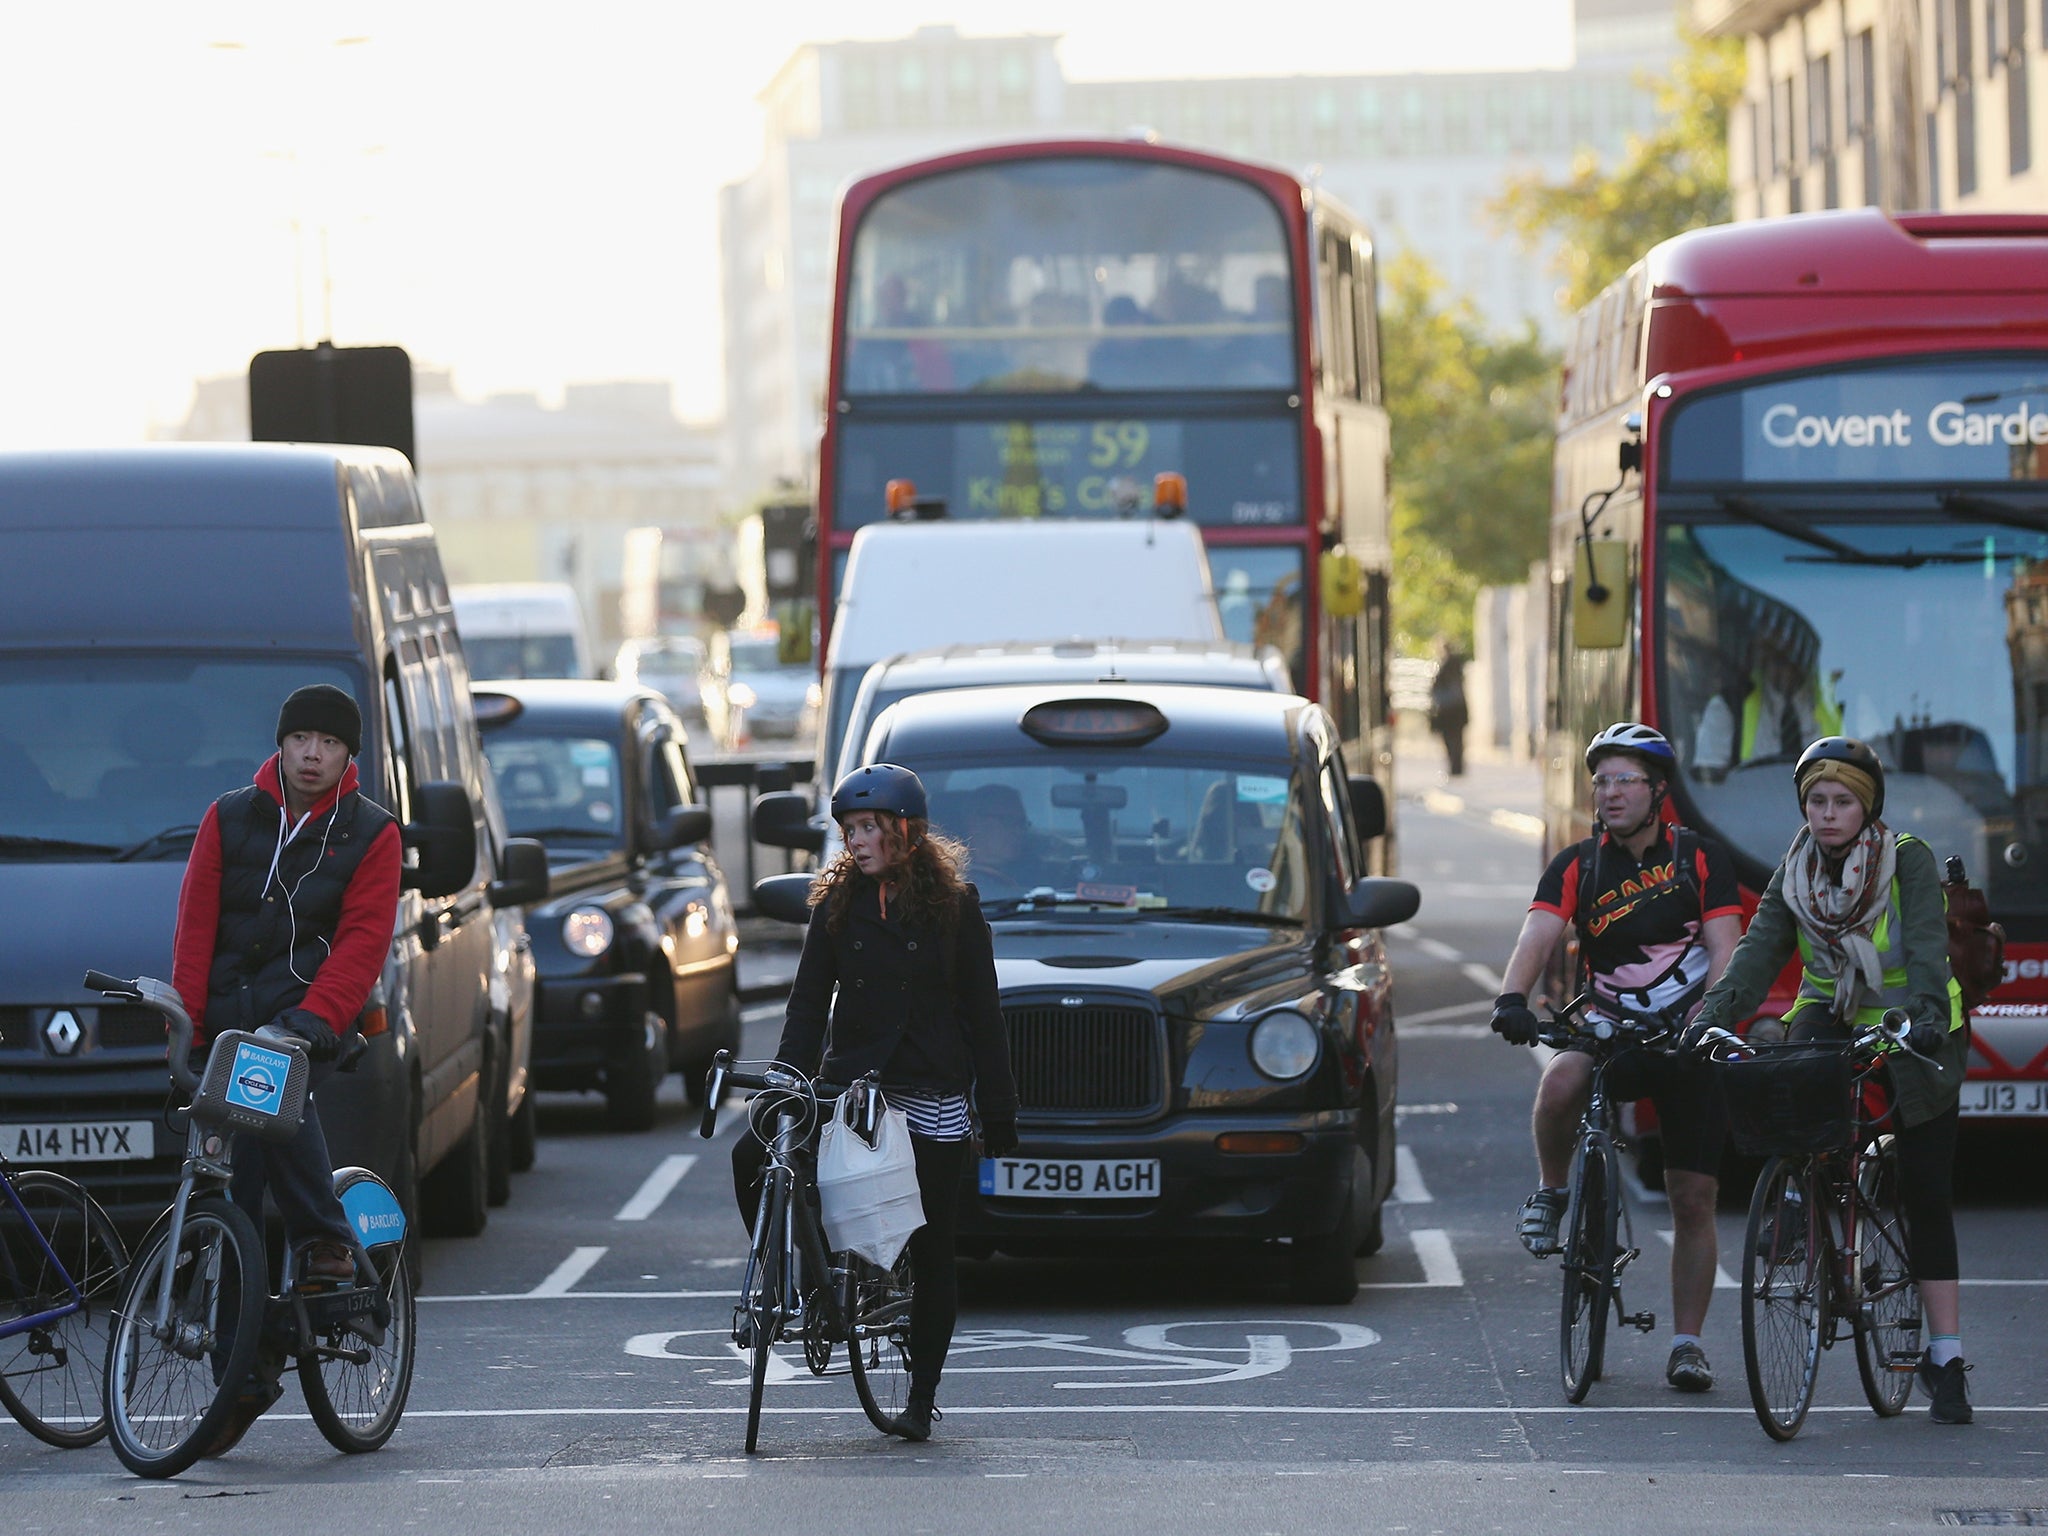 "Cyclists are a particularly angry and self-righteous bunch"